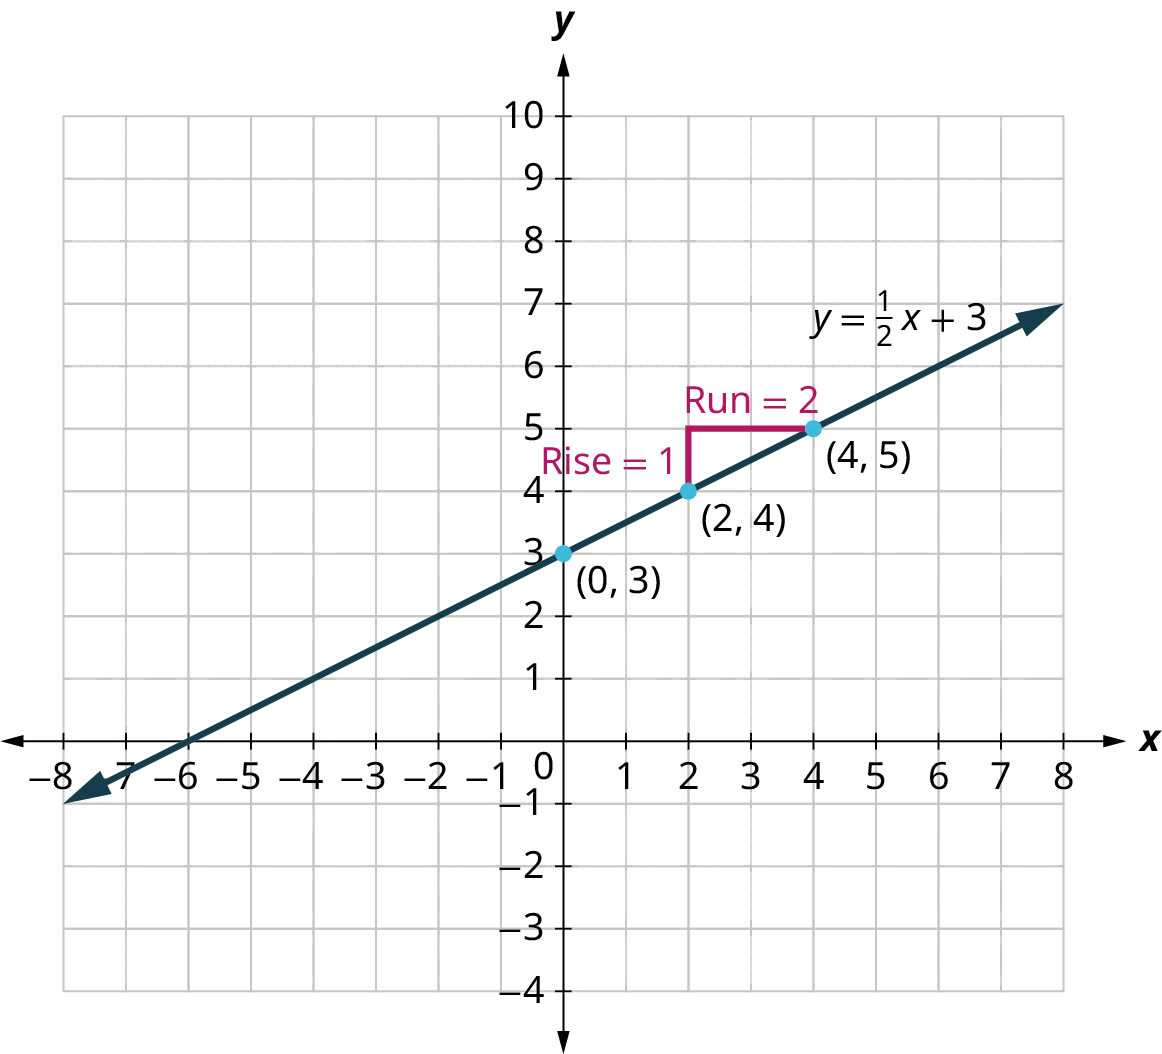 A line is plotted on an x y coordinate plane. The x-axis ranges from negative 8 to 8, in increments of 1. The y-axis ranges from negative 4 to 10, in increments of 1. The line passes through the following points, (0, 3), (2, 4), and (4, 5). A slope of the line is drawn connecting the points, (2, 4), (2, 5), and (4, 5). The vertical length between the points, (2, 4) and (2, 5), is labeled rise equals 1. The horizontal length between the points, (2, 5) and (4, 5) is labeled run equals 2. Note: all values are approximate.